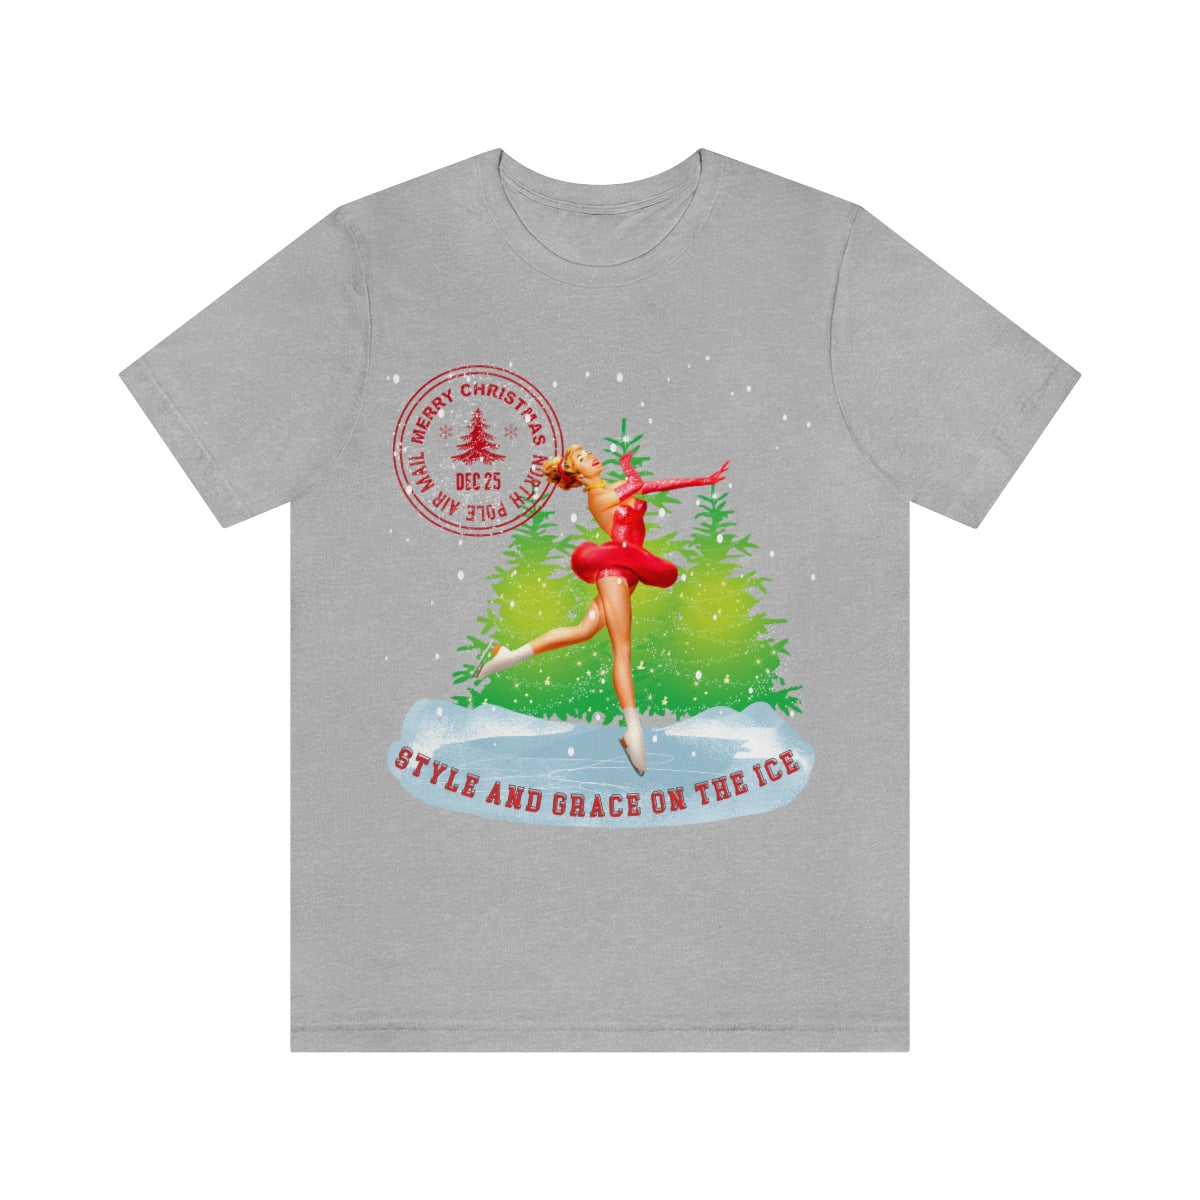 RETRO KERST T'SHIRT STYLE AND GRACE ON THE ICE